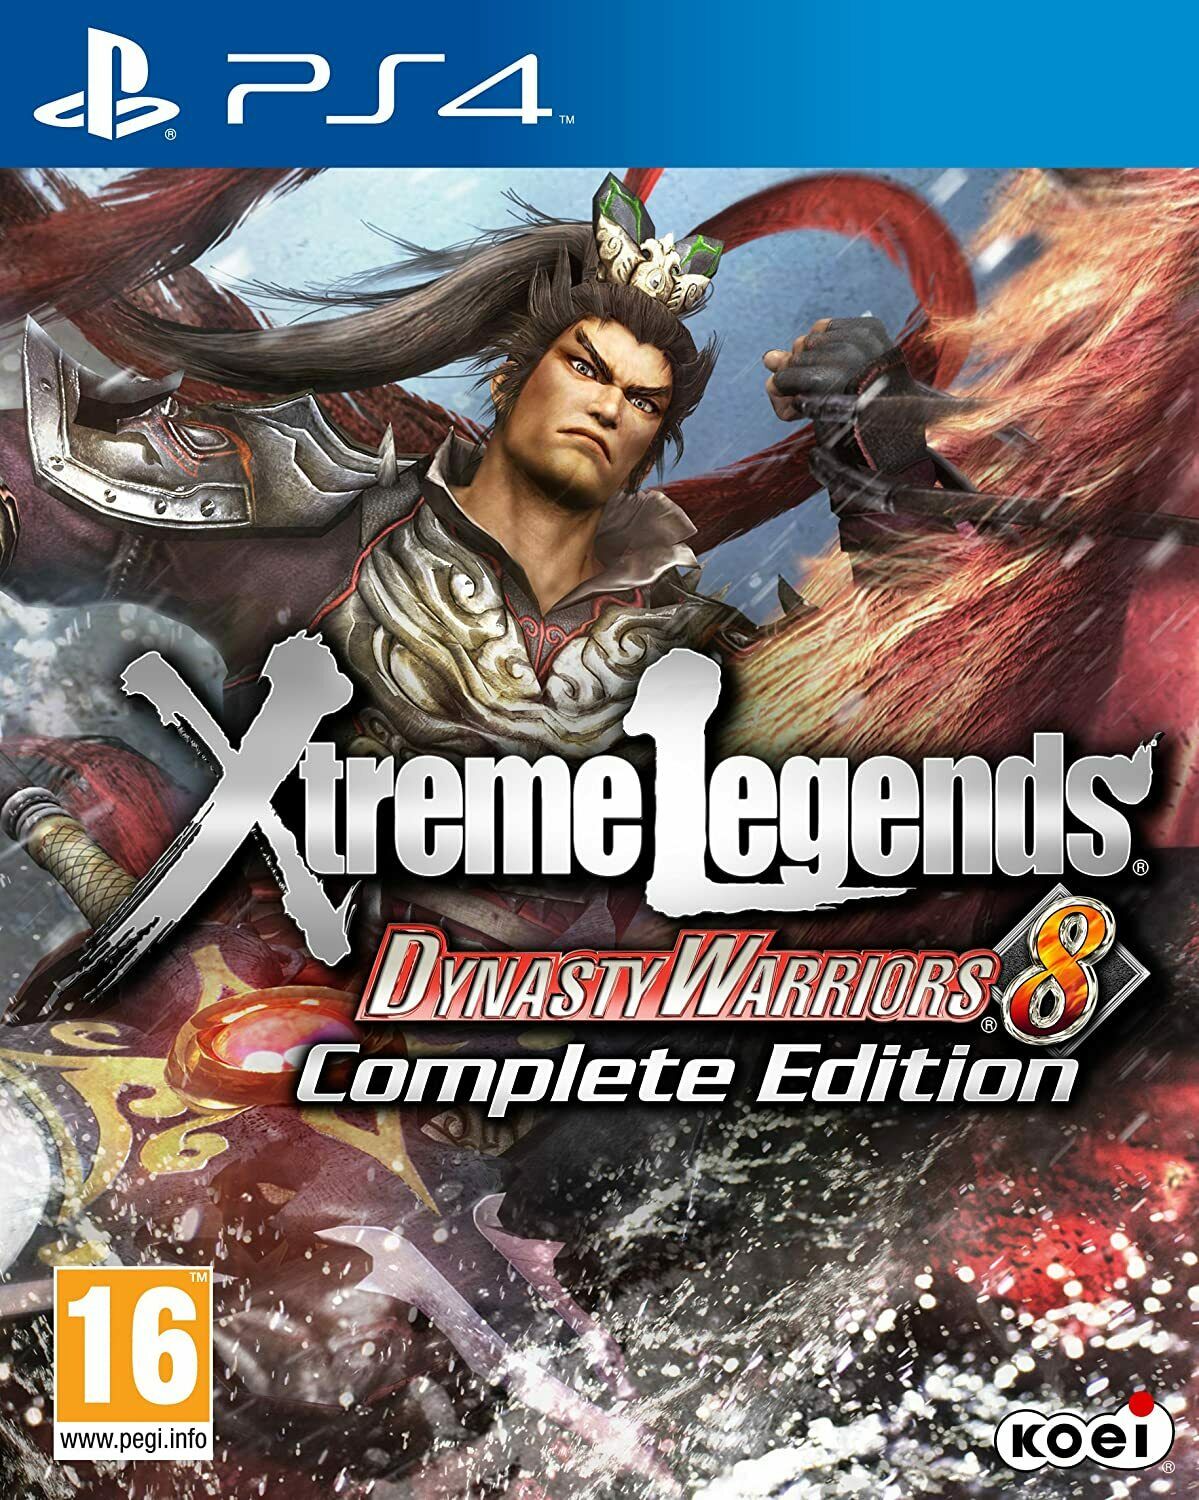 Dynasty Warriors 8 Xtreme Legends Complete Edition PS4 - saynama